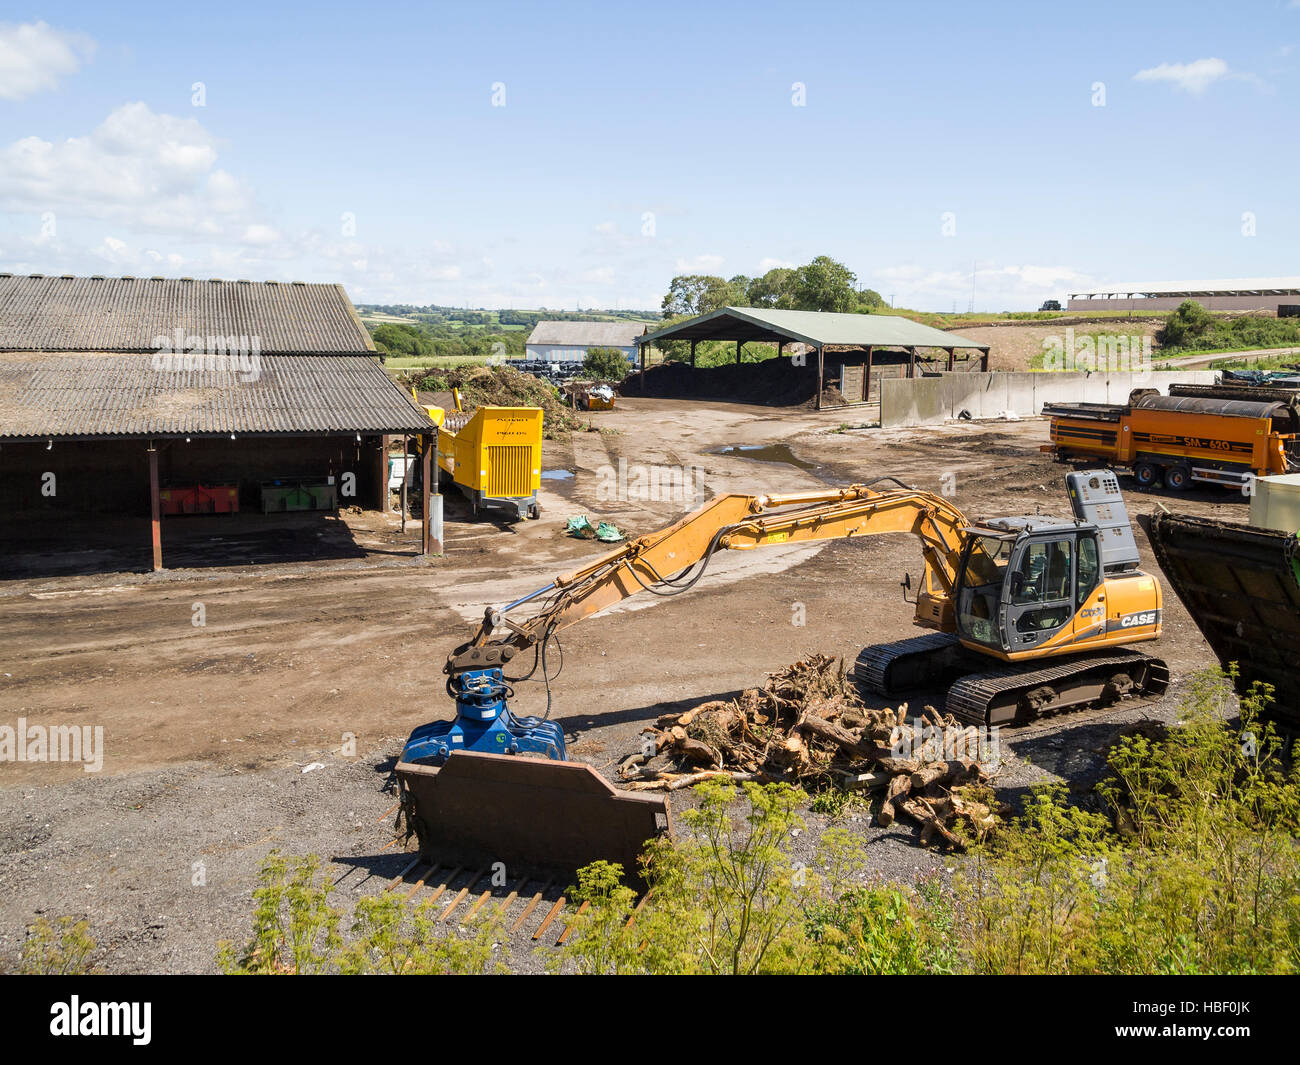 outdoor biomass recycling facility with machines Stock Photo